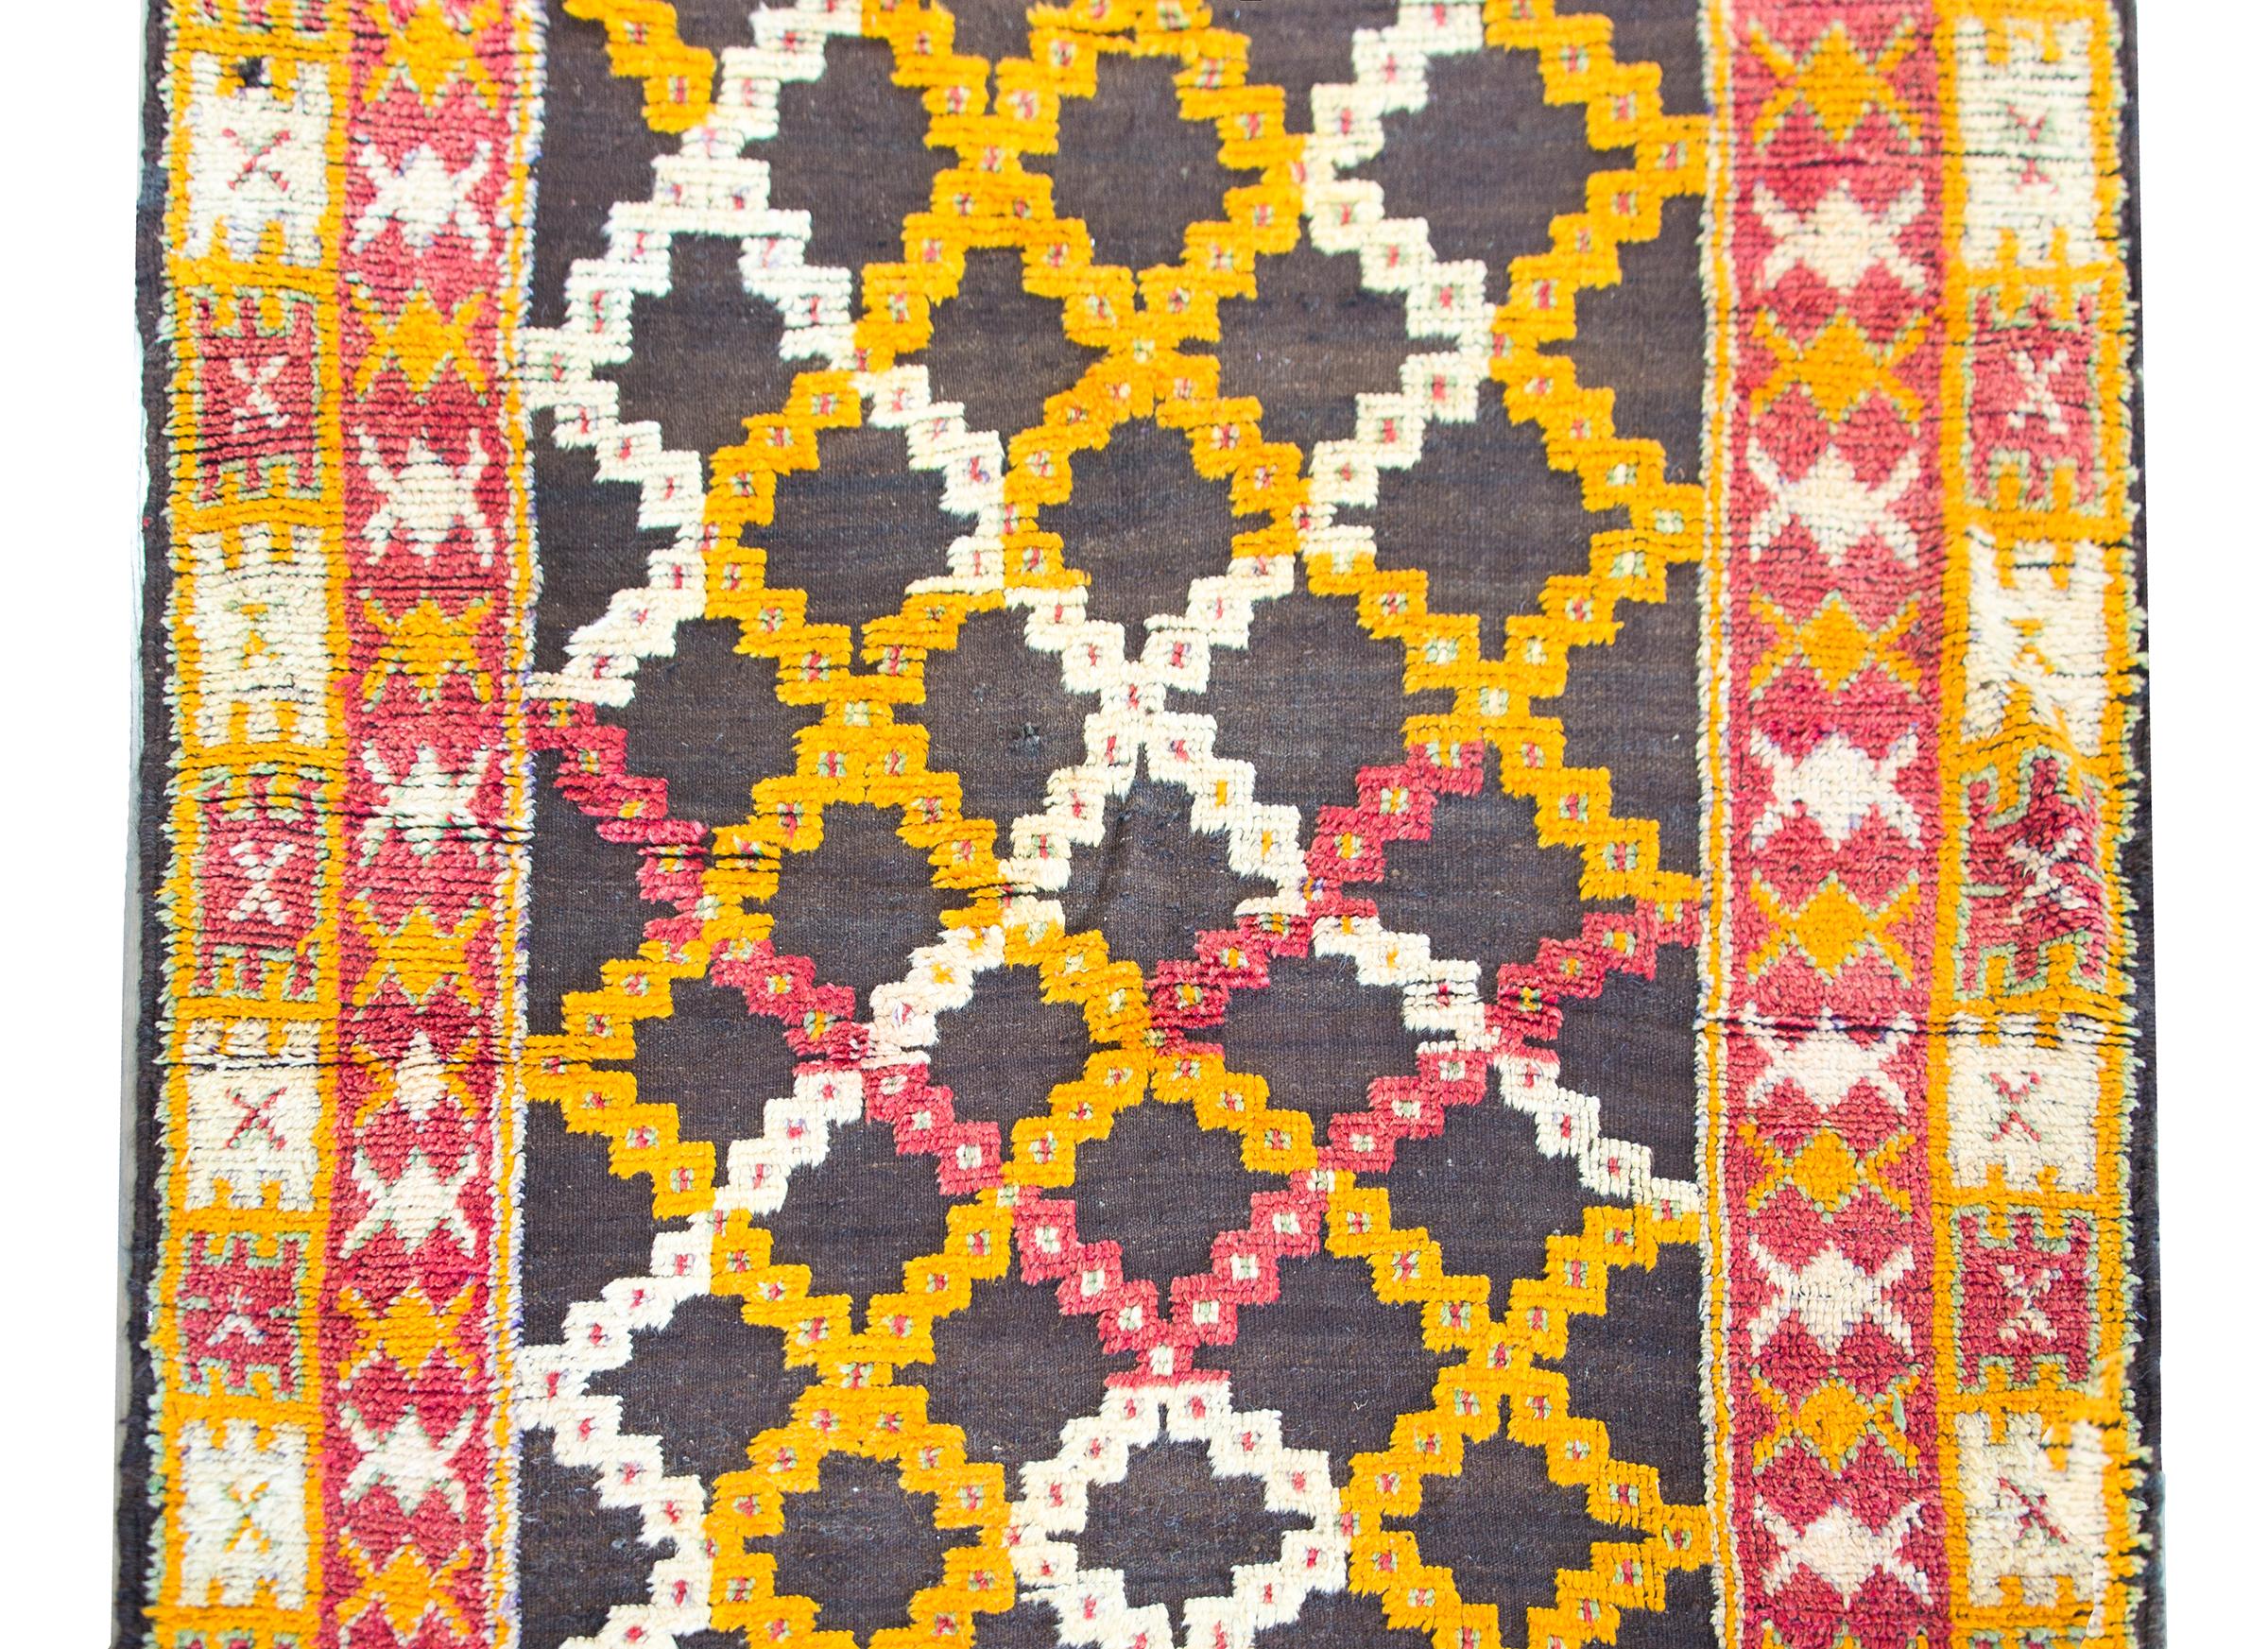 A wonderful mid-20th century Moroccan rug with a trellis pattern woven in gold, white, and crimson, set against a black background, and surrounded by a border with two distinct stylized floral patterned borders.